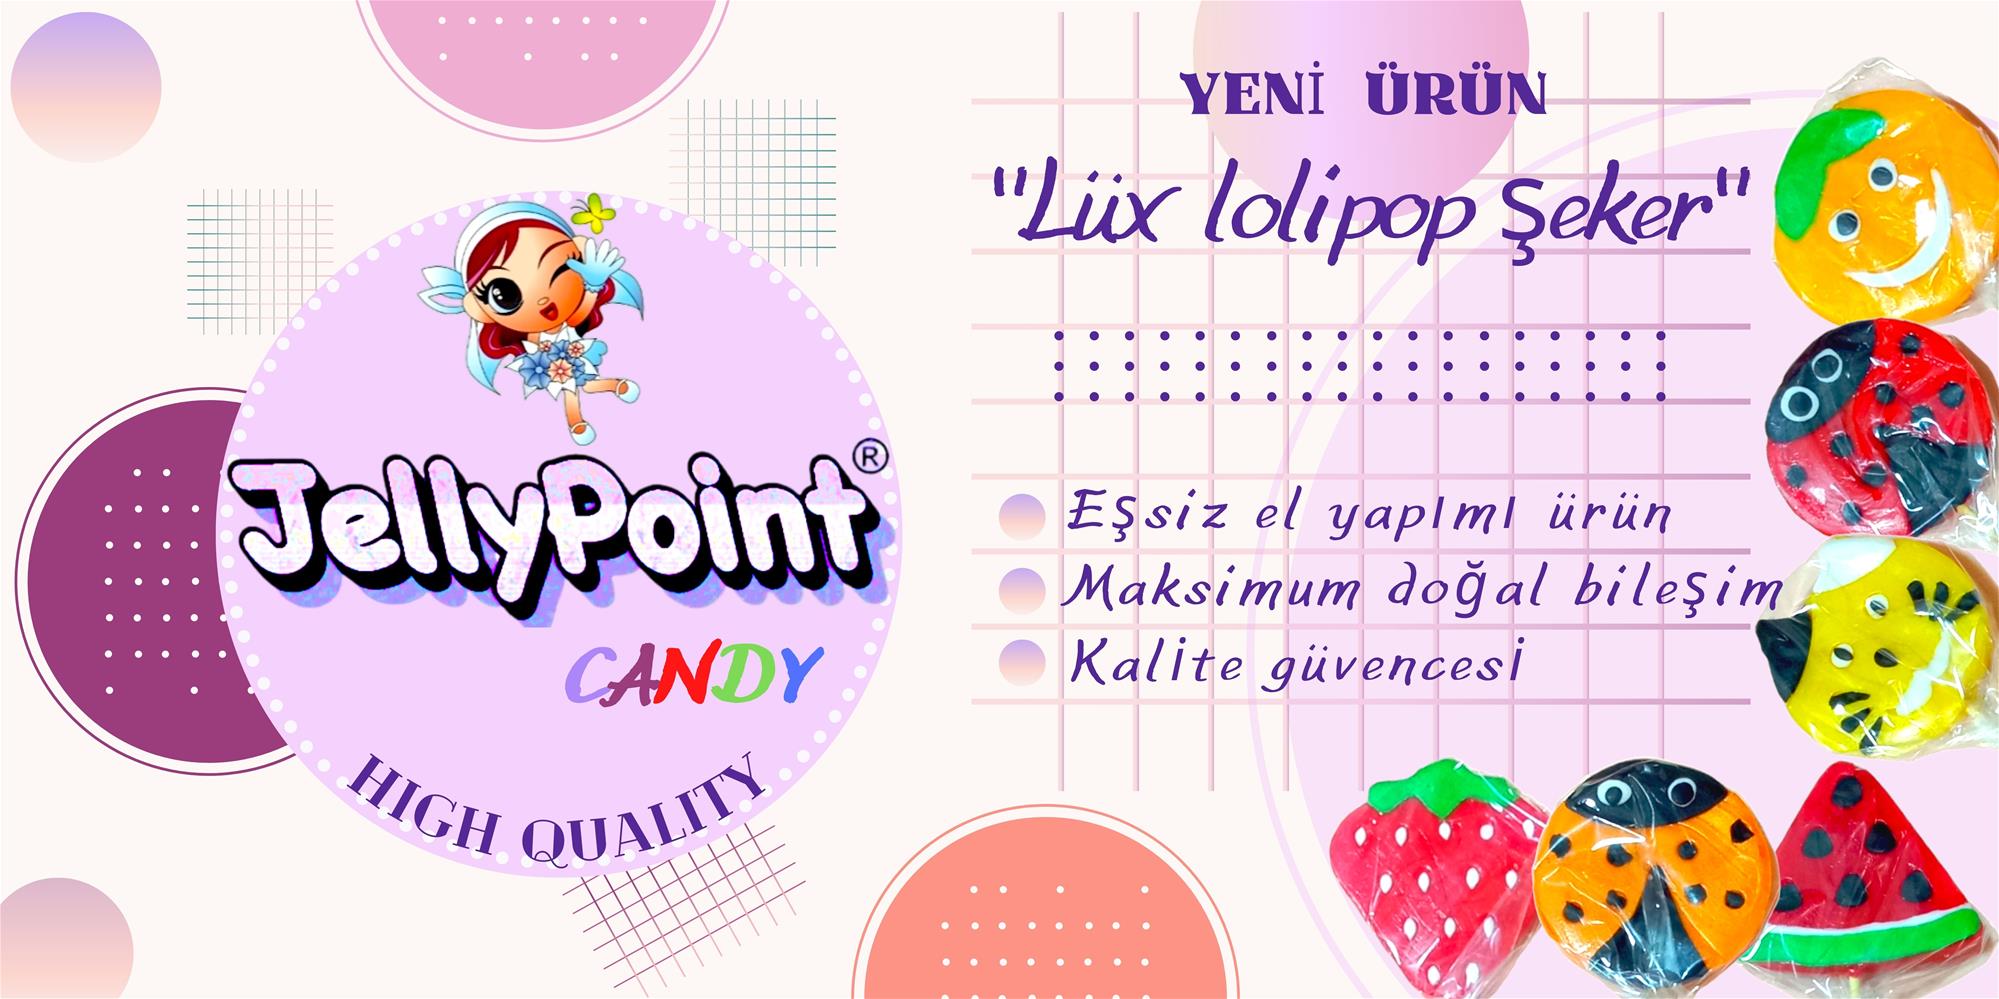 JELLYPOINT CANDY 